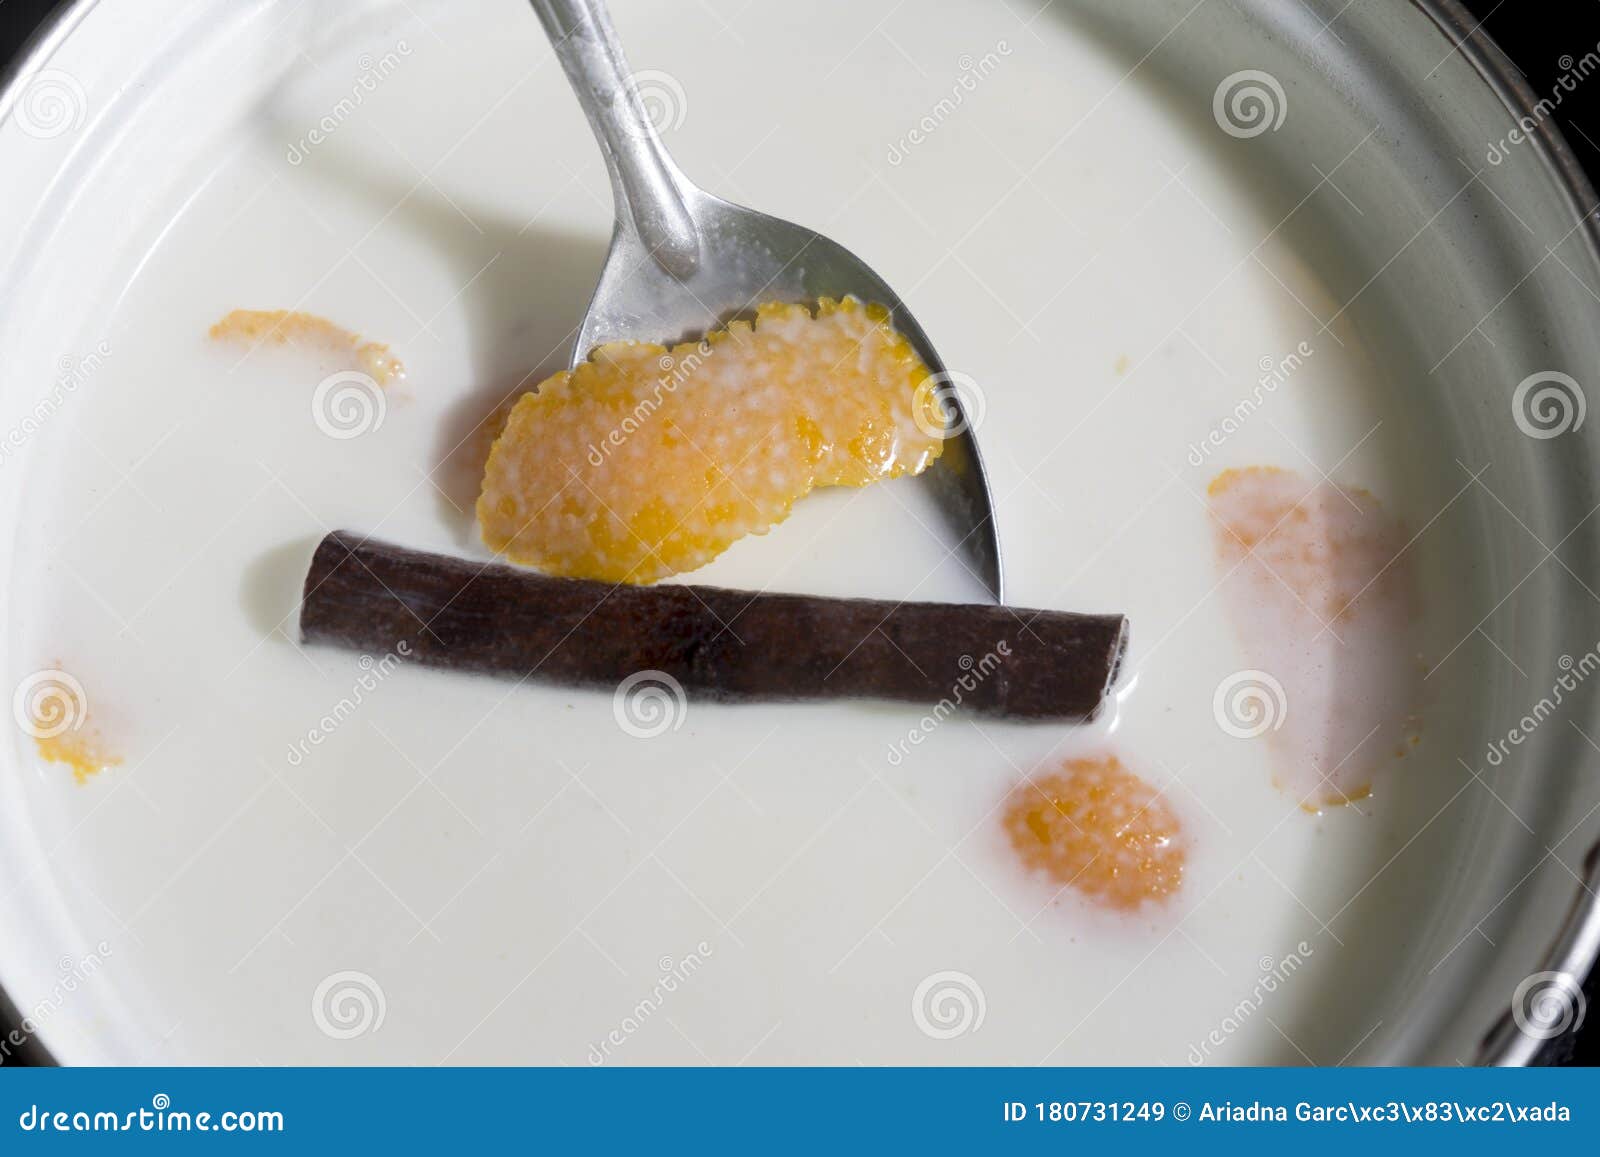 a spoon with a cinnamon stick inside a saucepan with milk and orange peel.